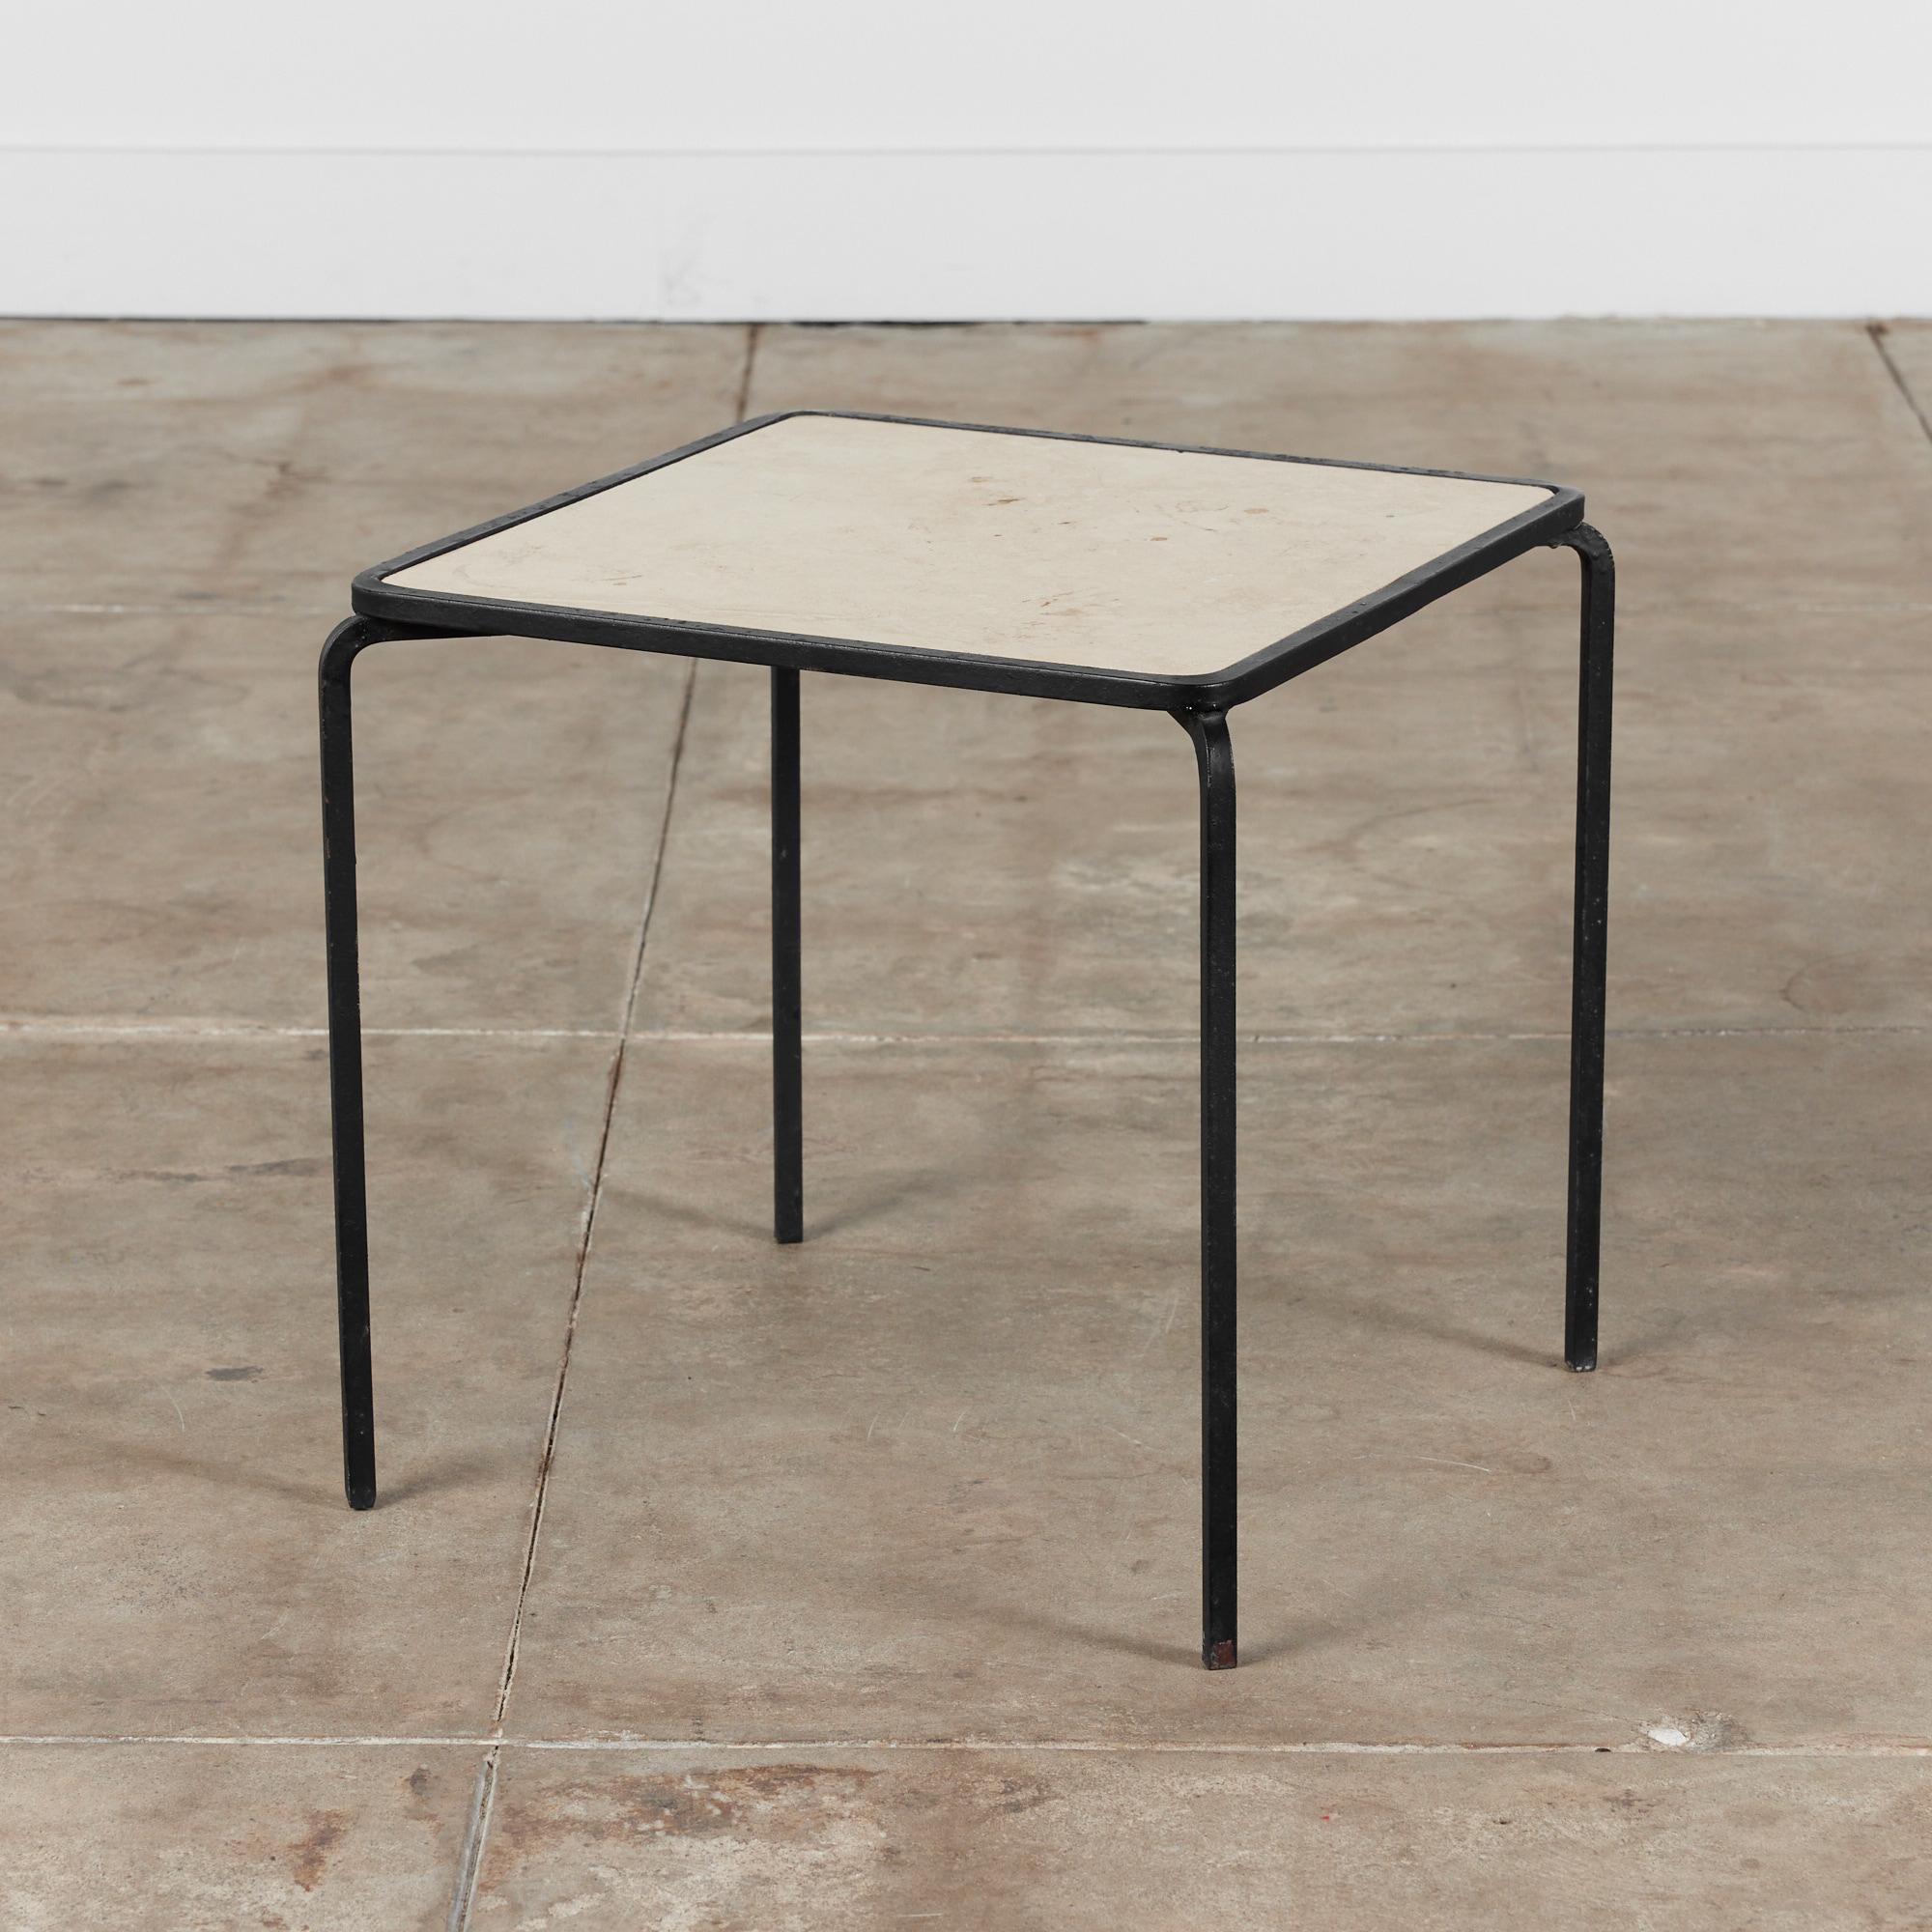 Side table by Allan Gould, for Reilly-Wolff c.1950s, USA. The table features wrought iron frame supported by slender square legs, and an inset square travertine table top.

Dimensions
17” diameter x 17